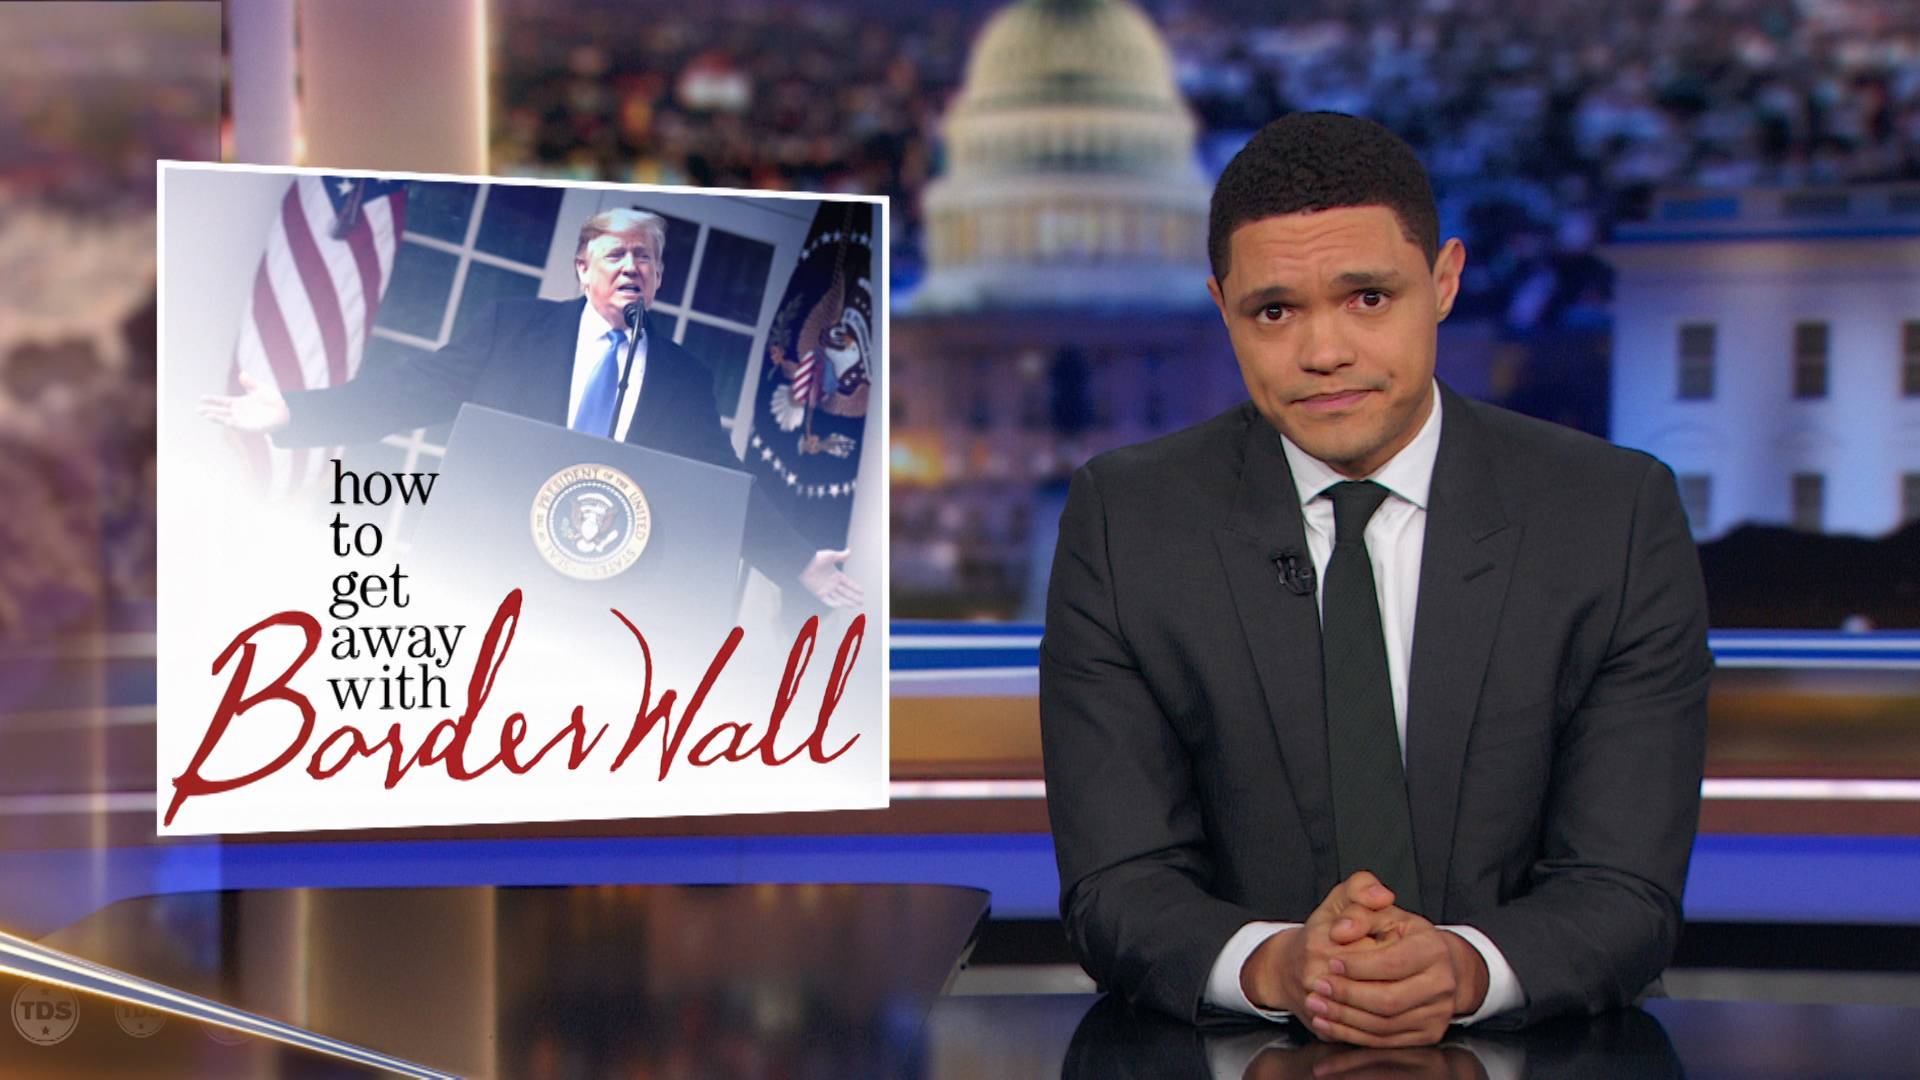 The Daily Show With Trevor Noah Wallpapers